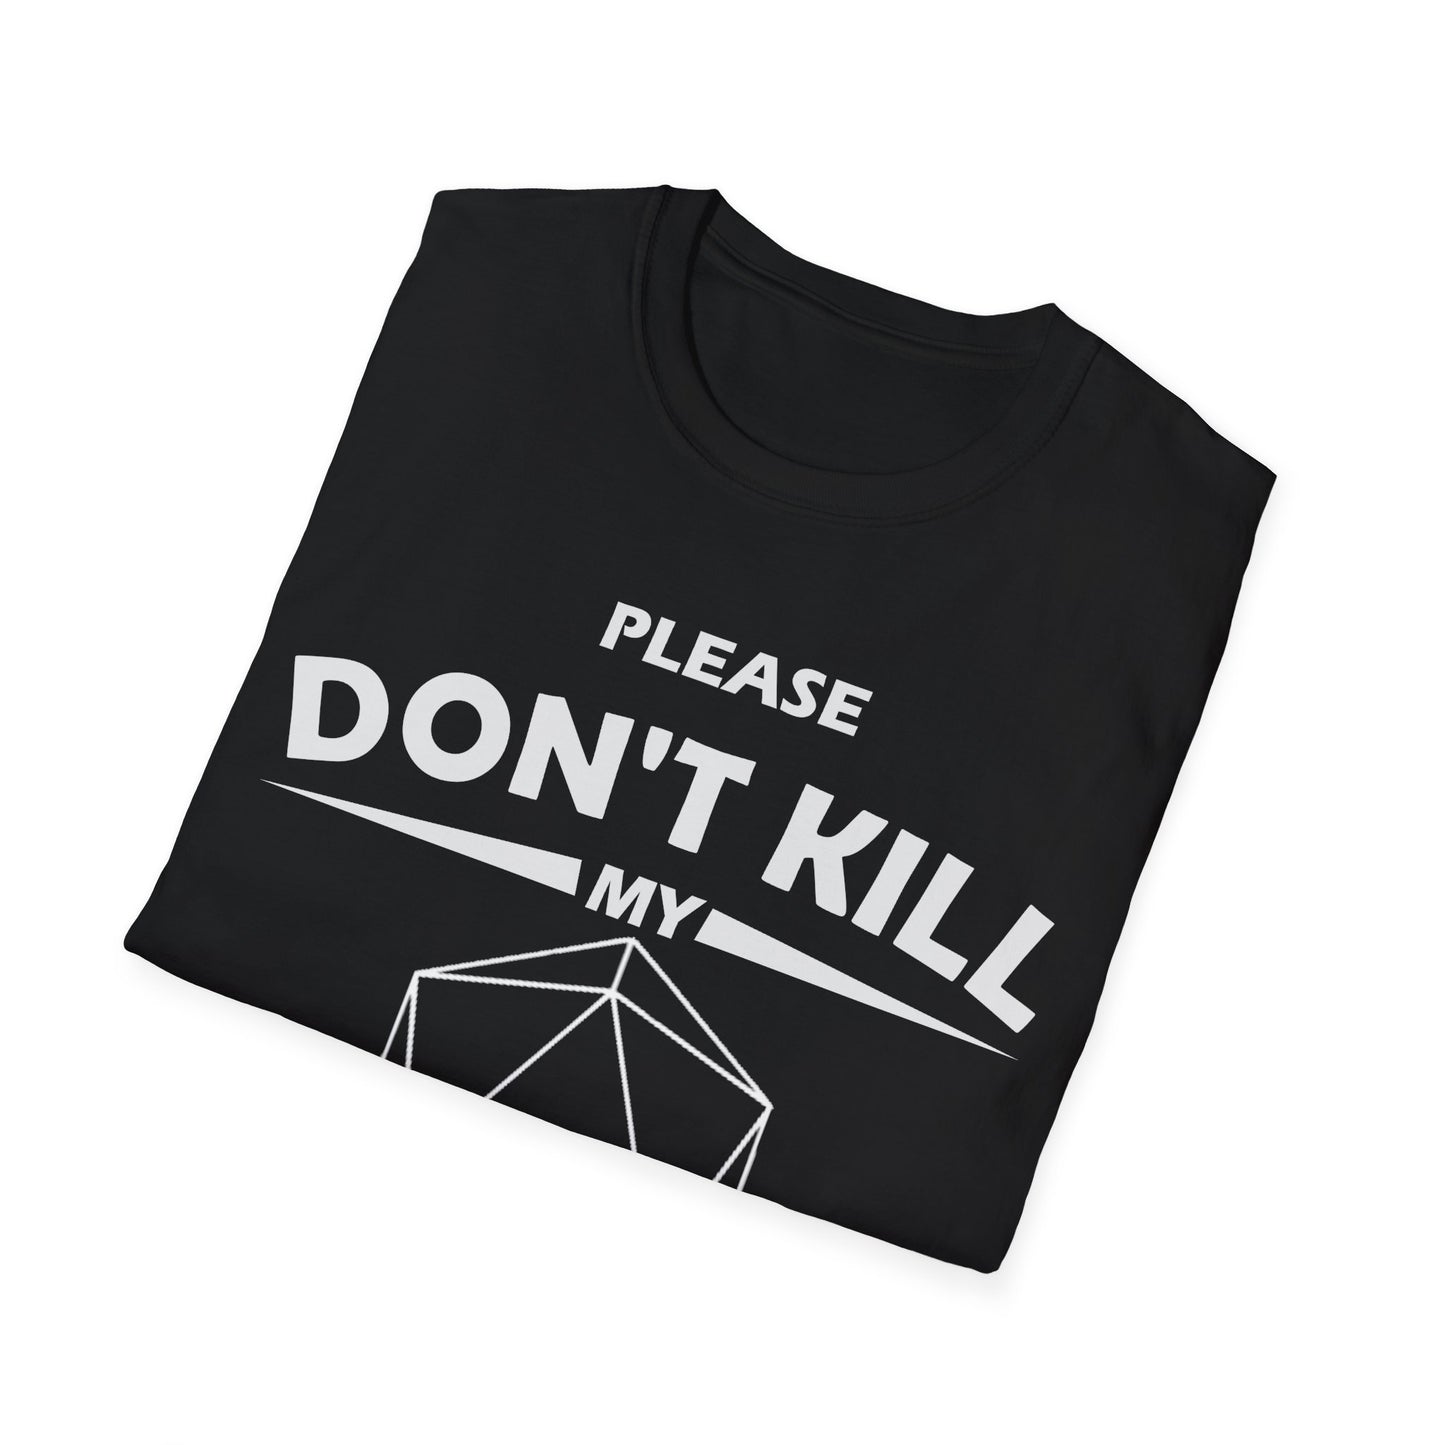 Please Don't Kill My Sorcerer - White - Unisex Softstyle T-Shirt